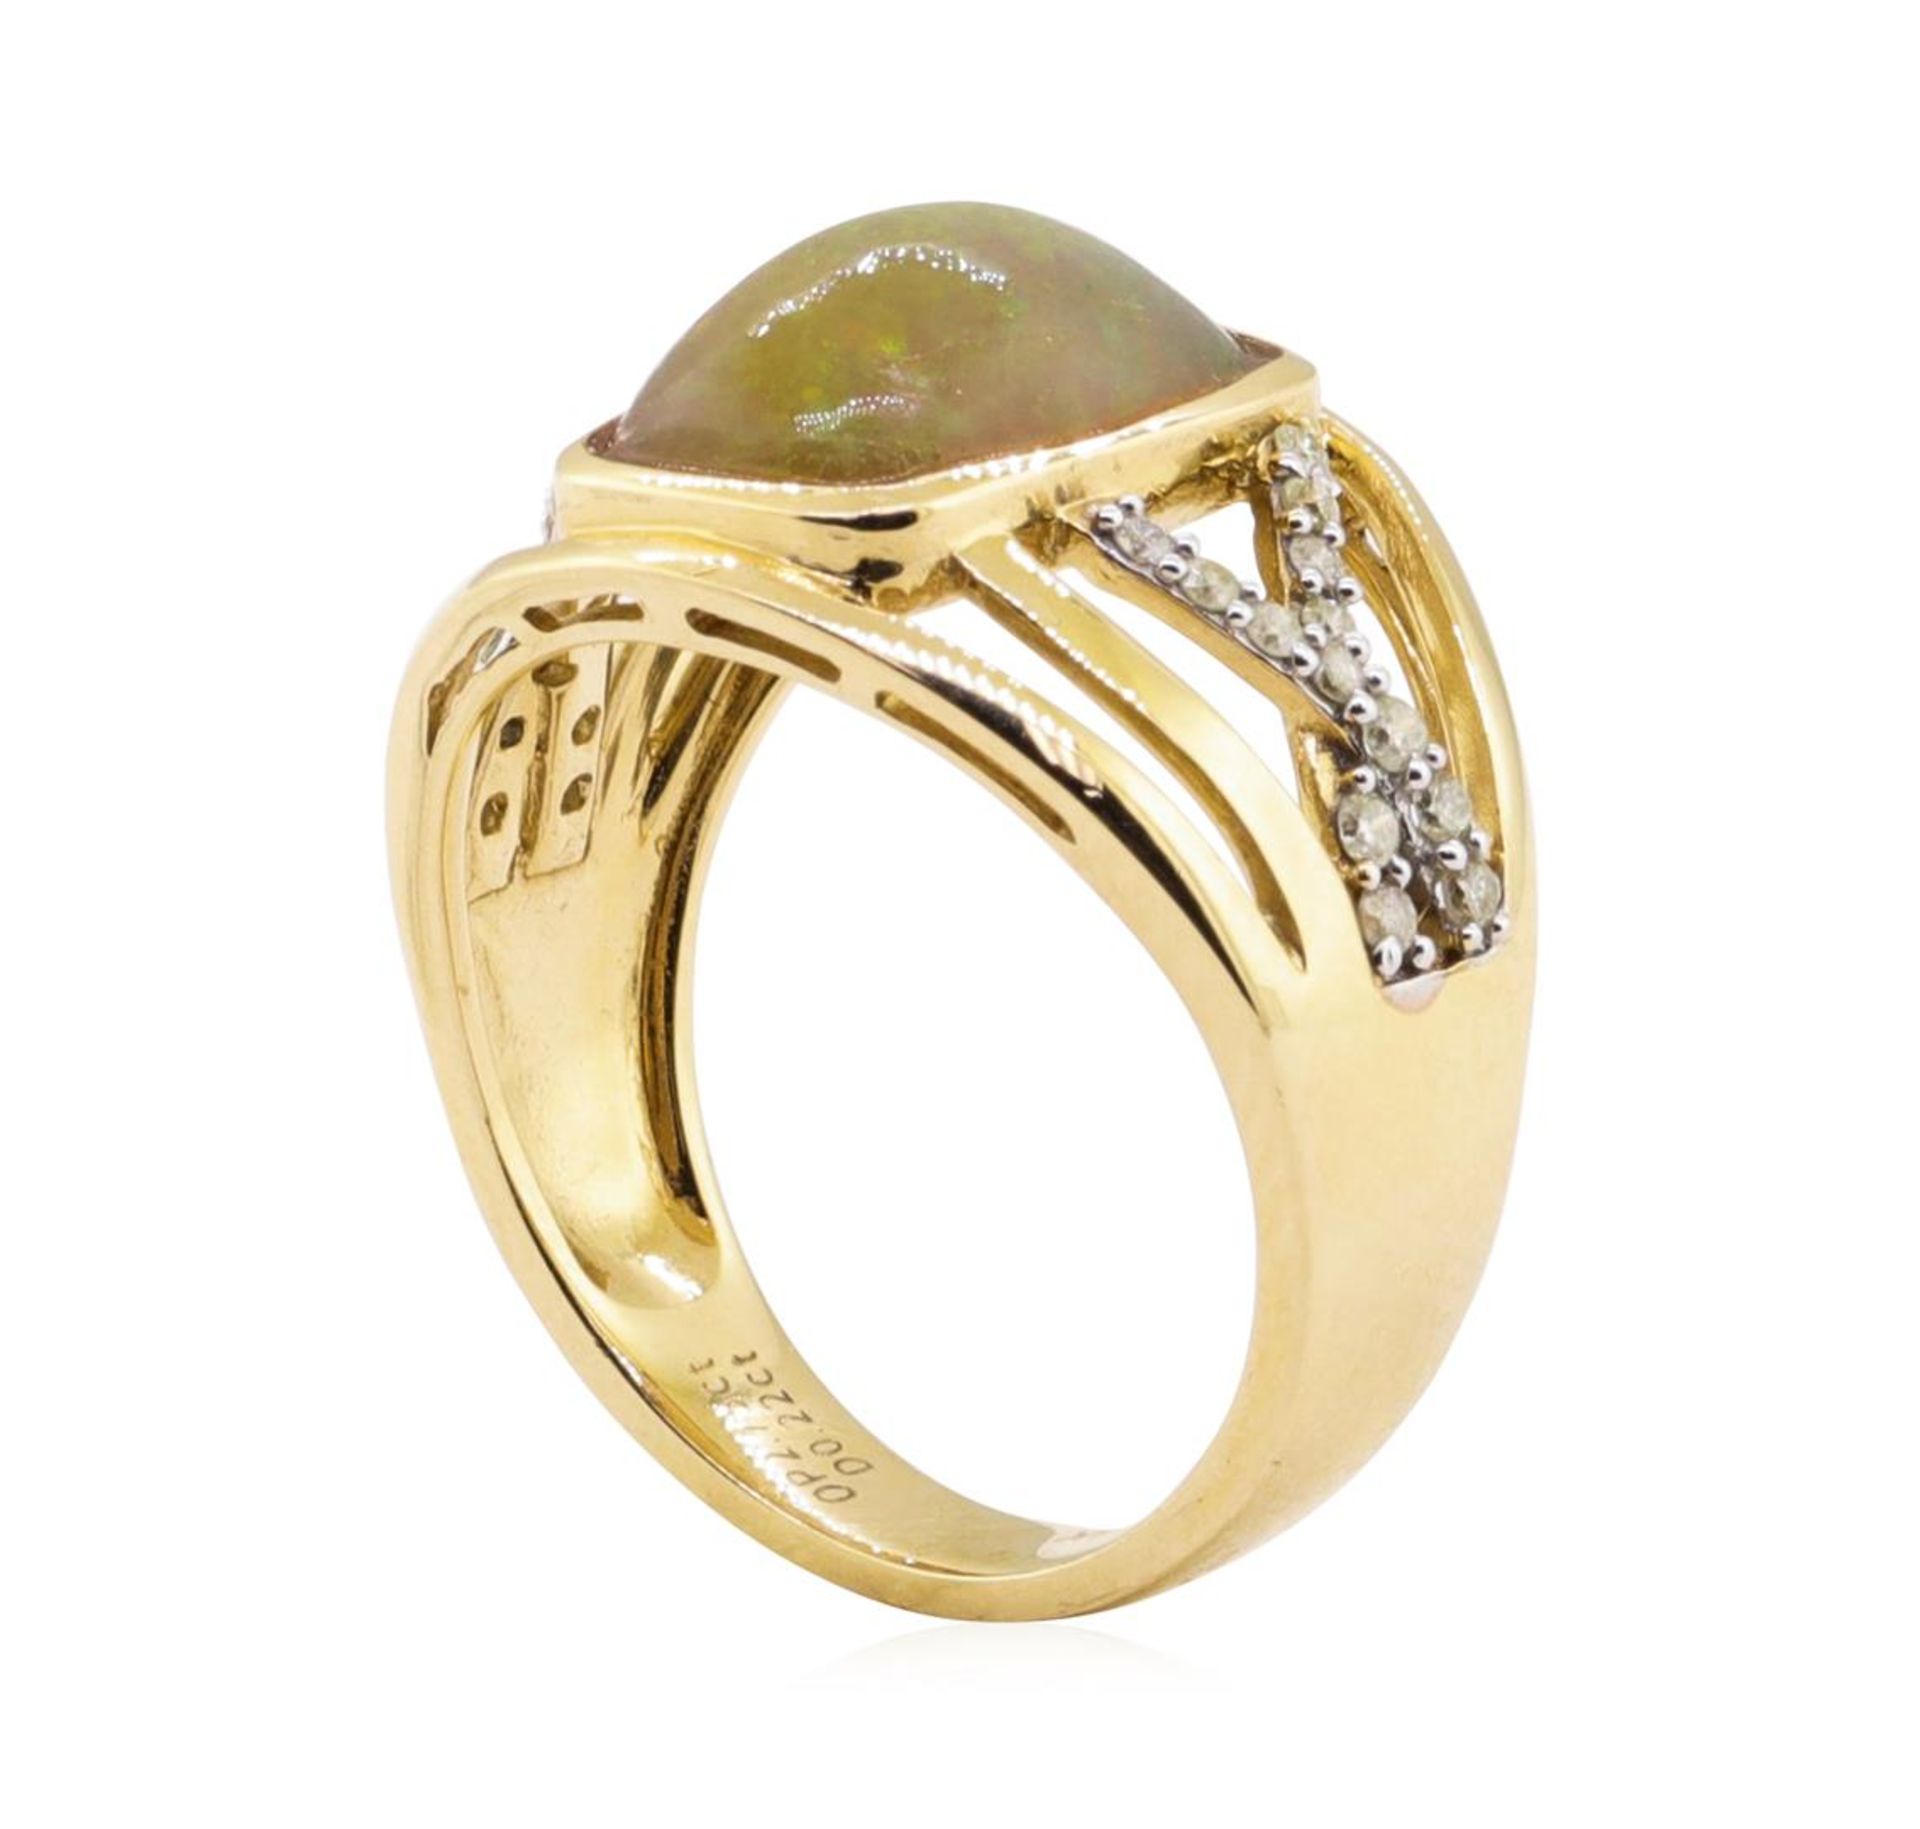 2.75 ctw Opal and Diamond Ring - 14KT Yellow Gold - Image 4 of 5